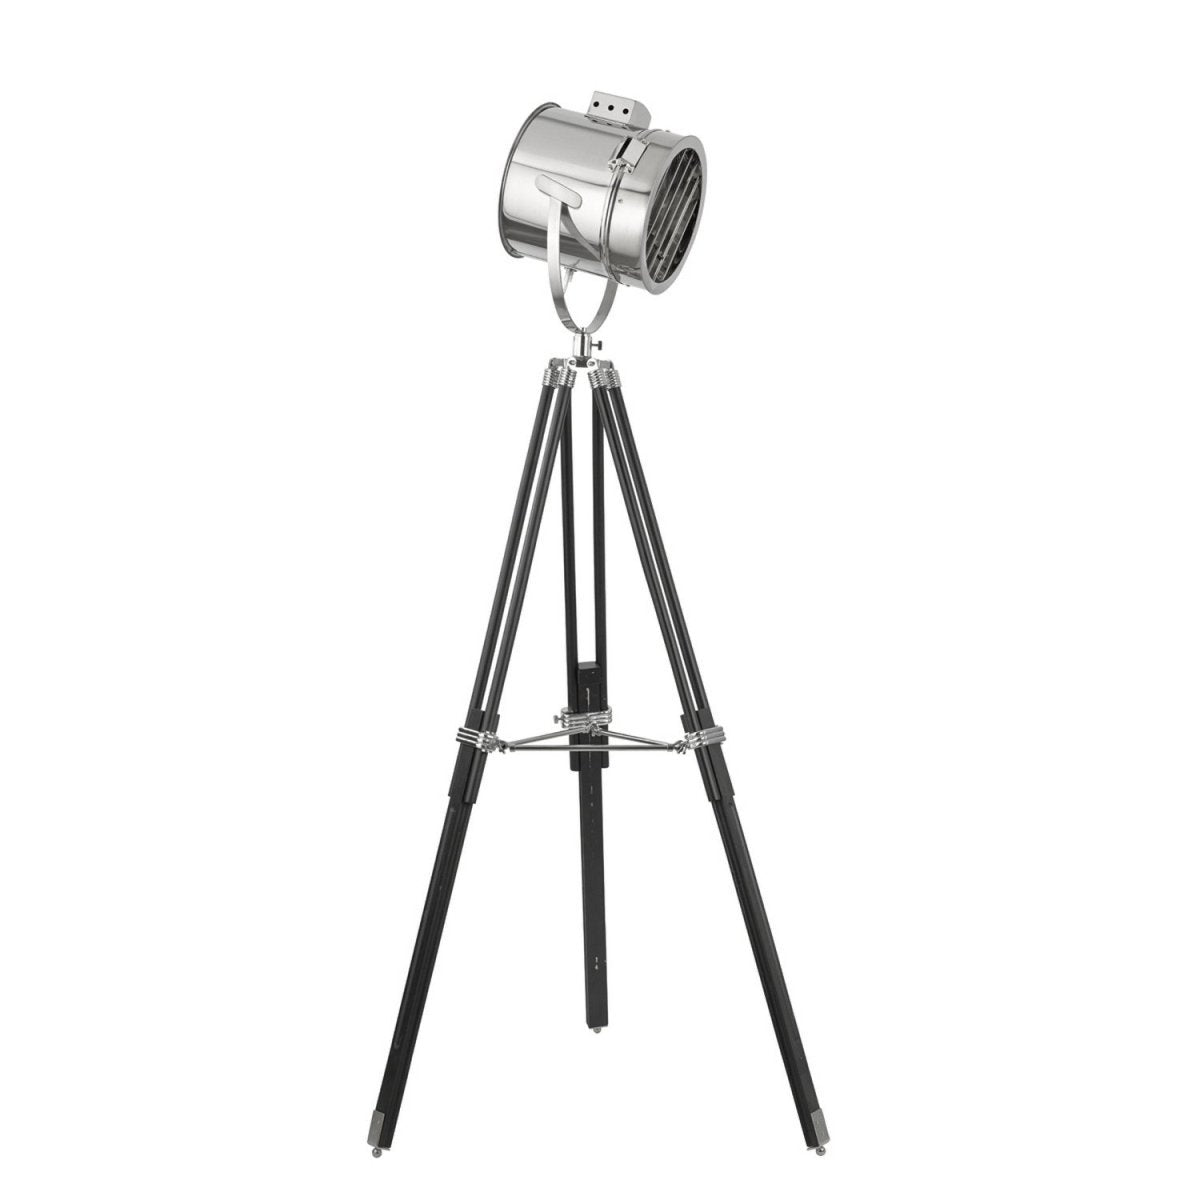 Stage Spot Light Free Standing Standard Chrome Floor Lamp With Stylish Shade New - Bonnypack